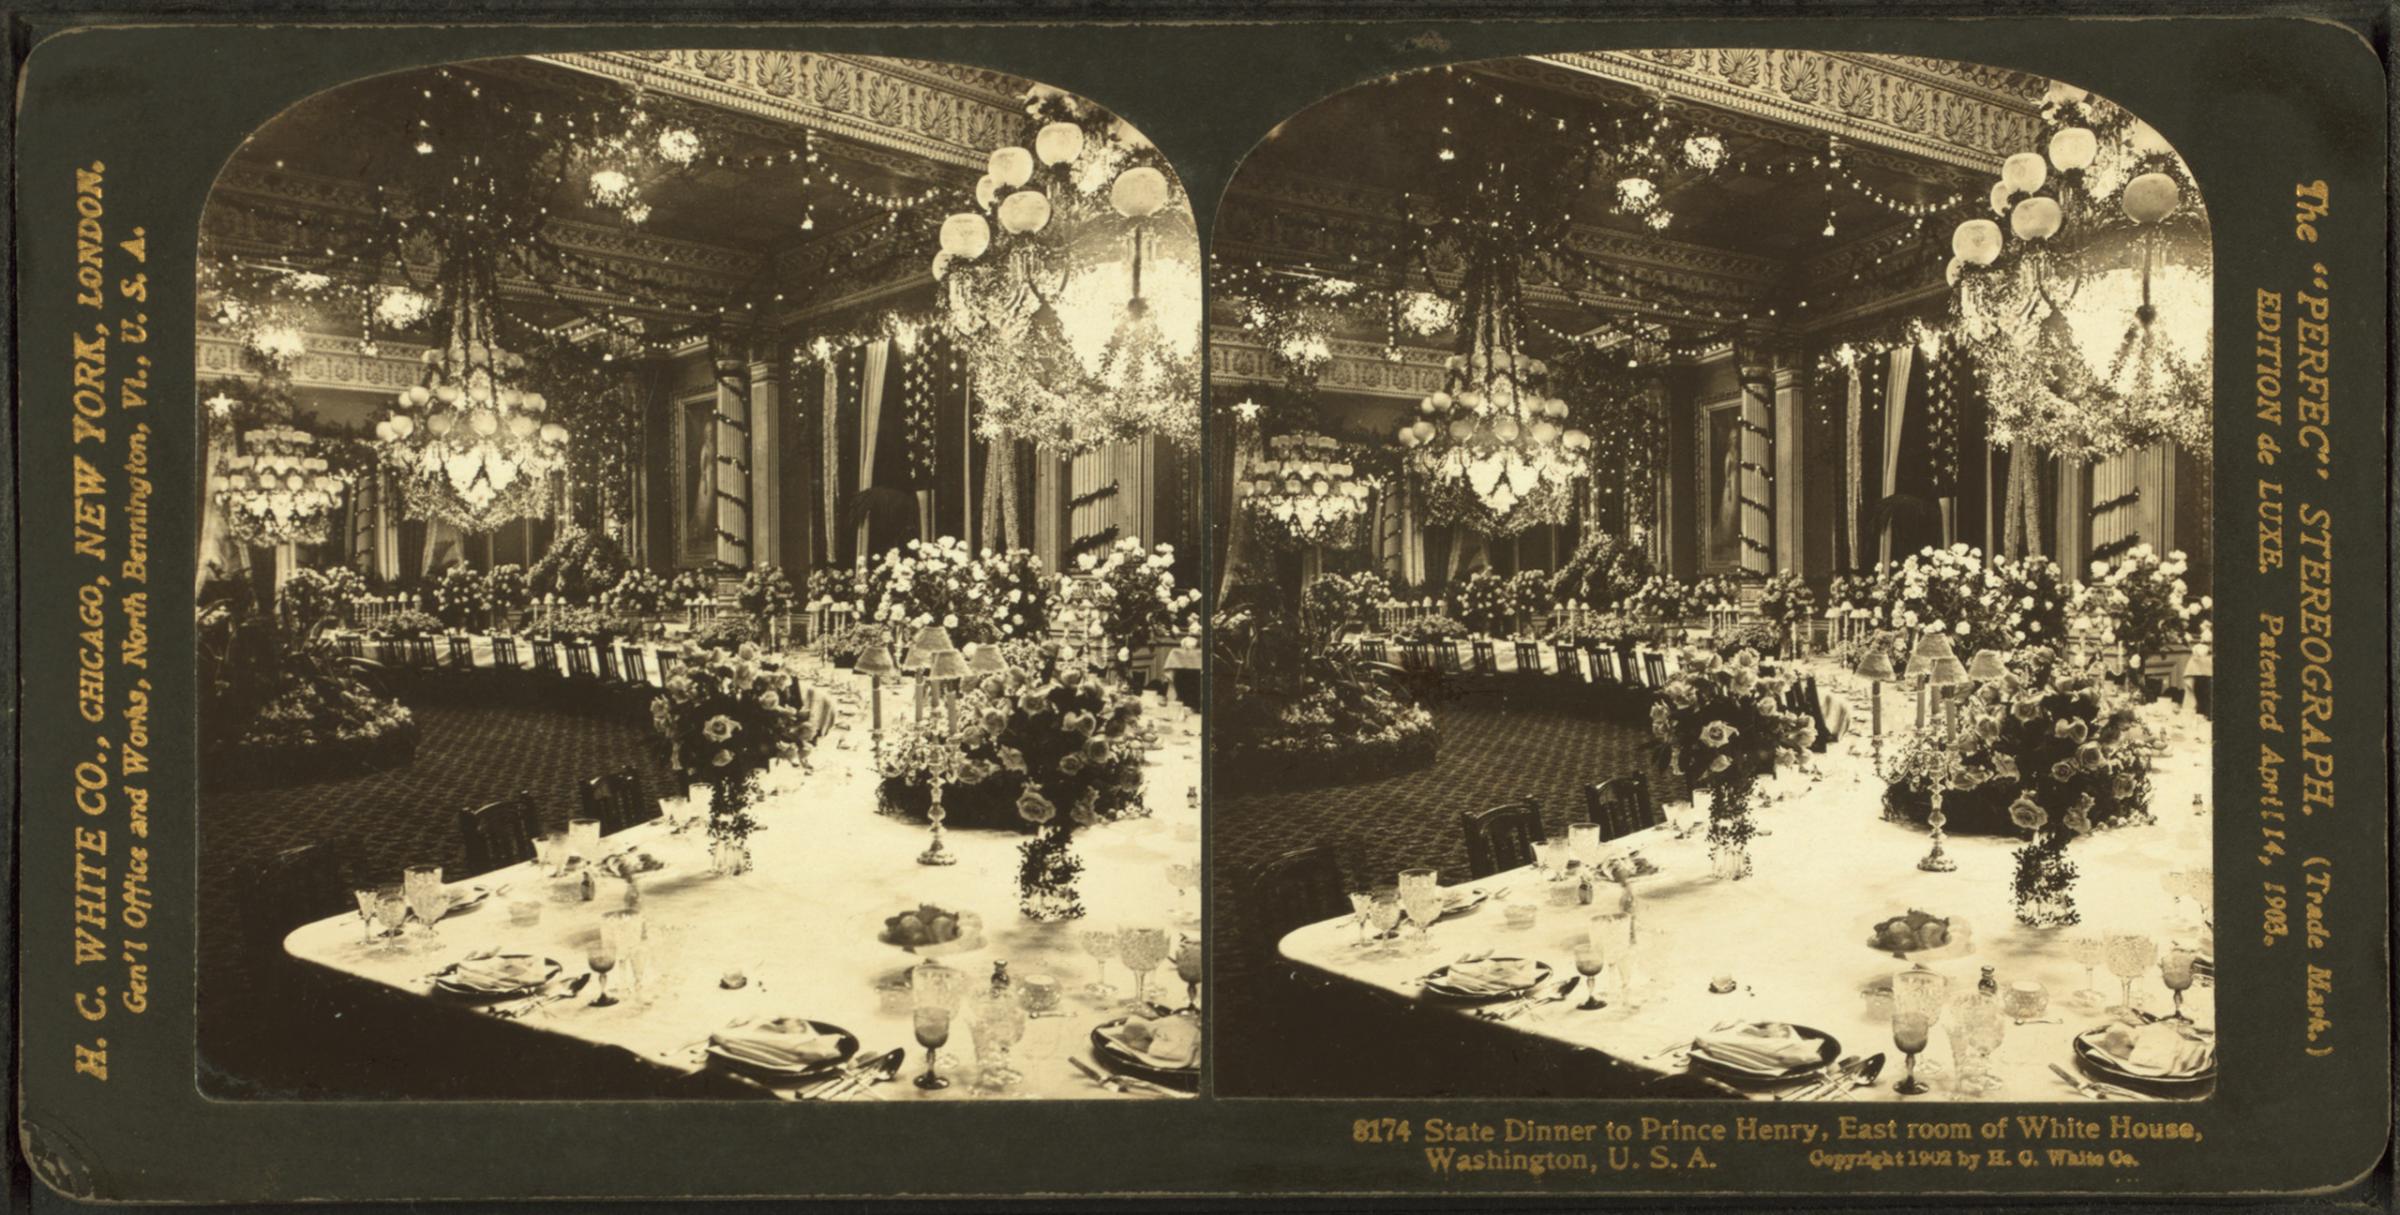 State dinner to Prince Henry. East Room of White House, Washington D.C., 1902. Theodore Roosevelt, President.